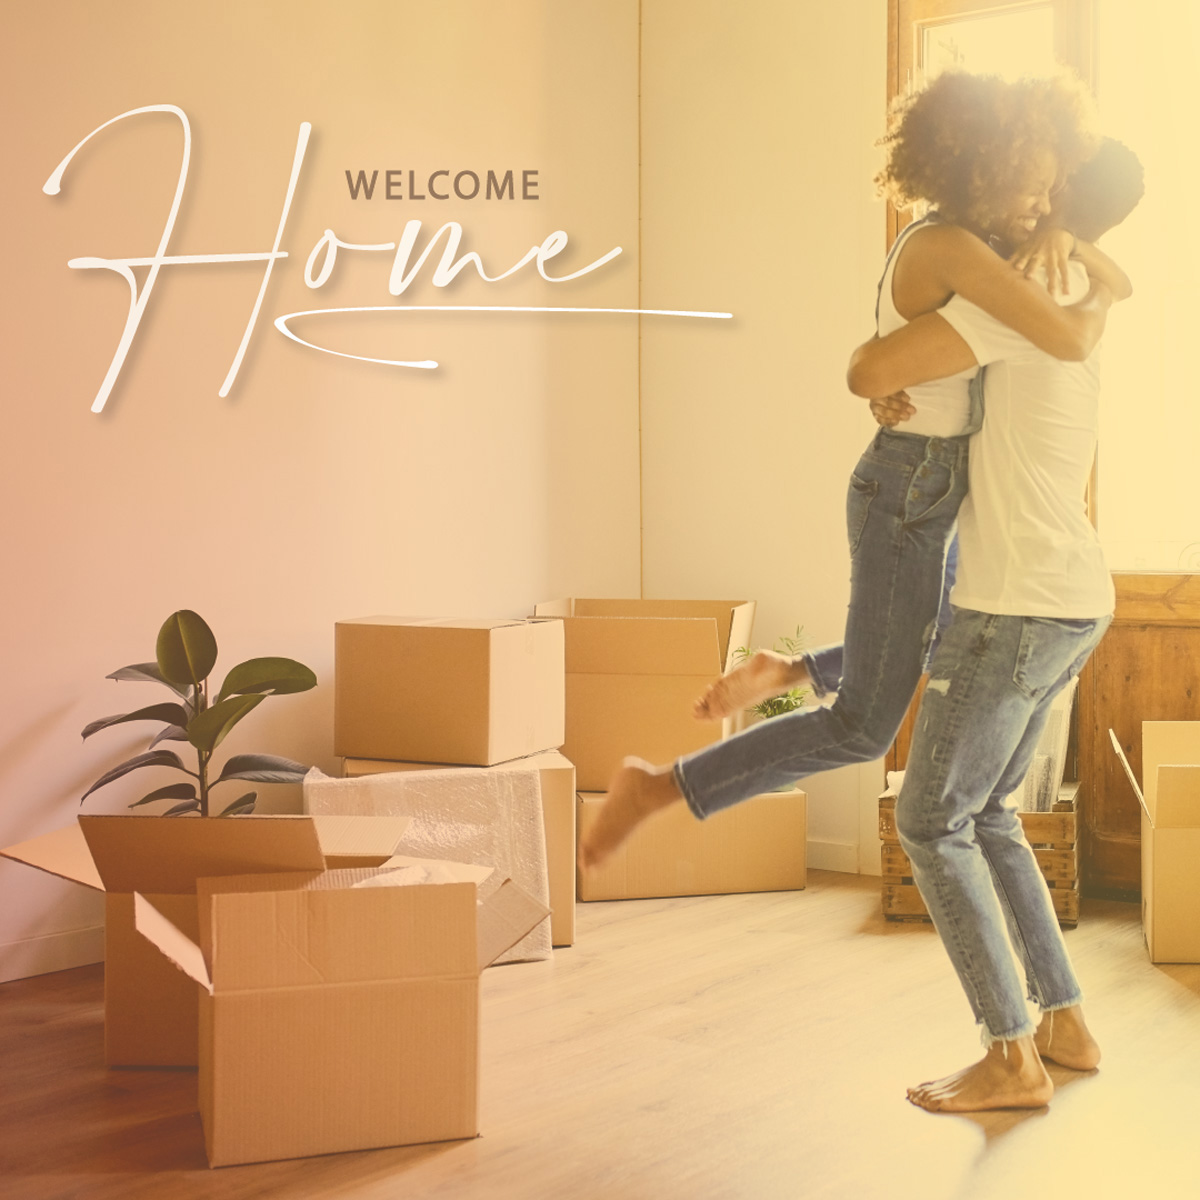 Achieve your dream of homeownership with an FHA loan. Ideal for first-time buyers, this program offers low down payments and flexible credit score requirements. Learn more and text 'Investors' to 33655 for additional information! #wilsonwholesalemortgage #investment #mortgageloan